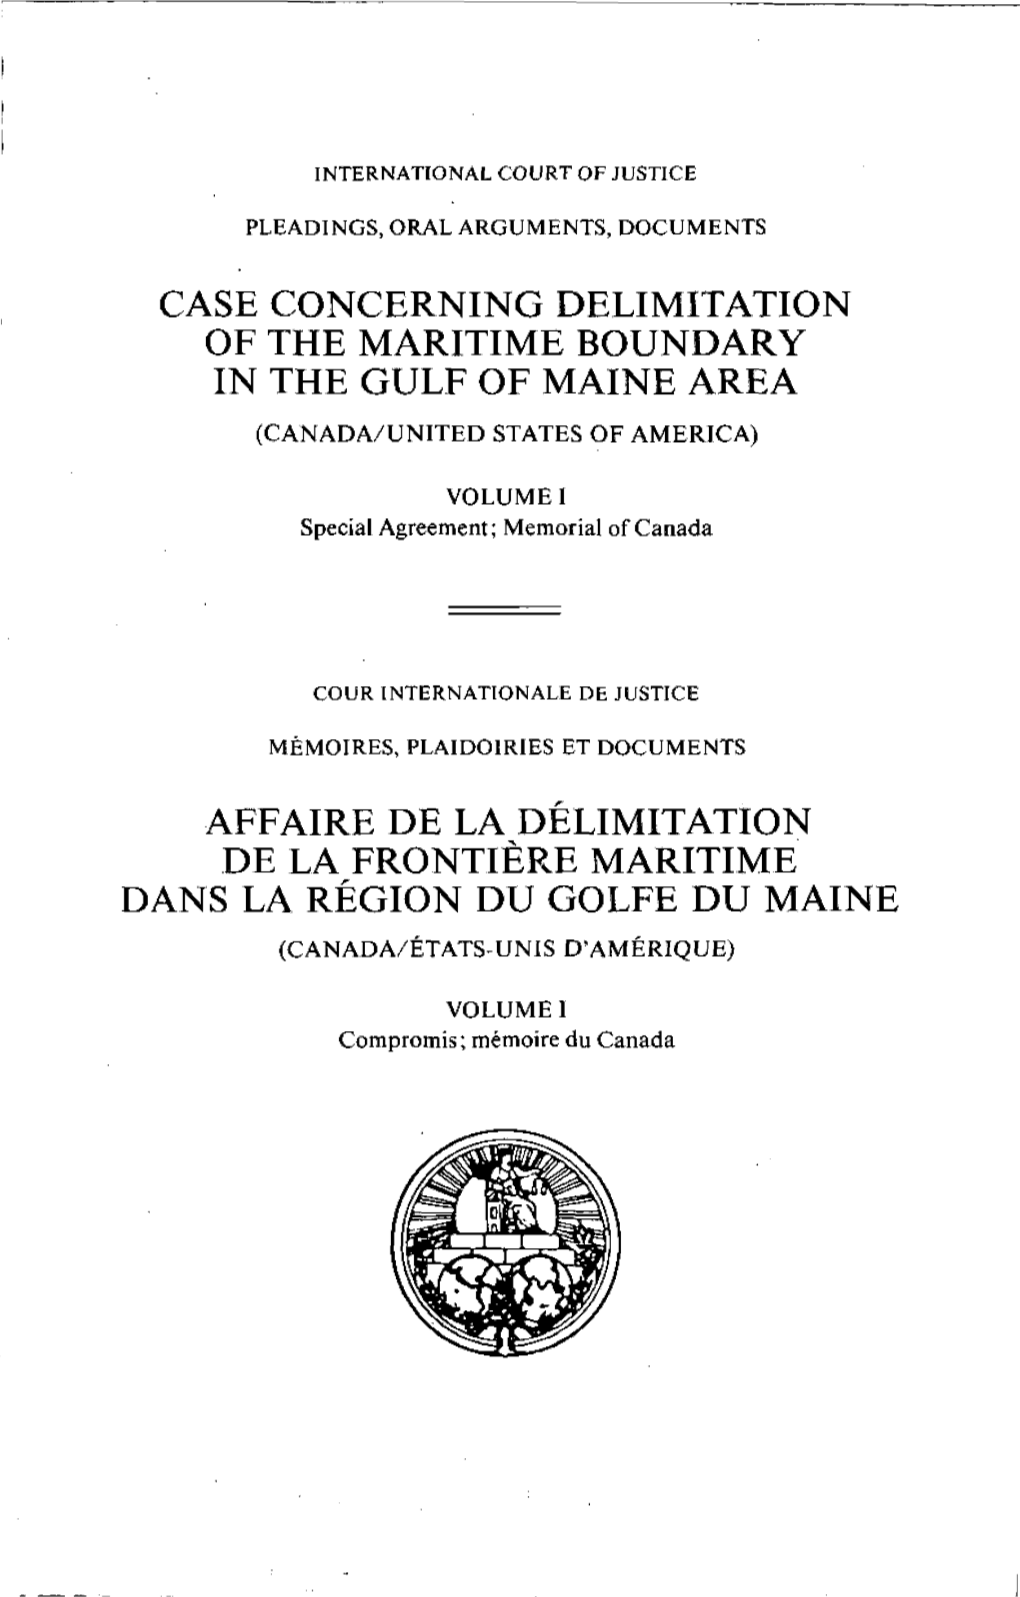 Case Concerning Delimitation of the Maritime Boundary in the Gulf of Maine A.Rea (Canada/United States of America)